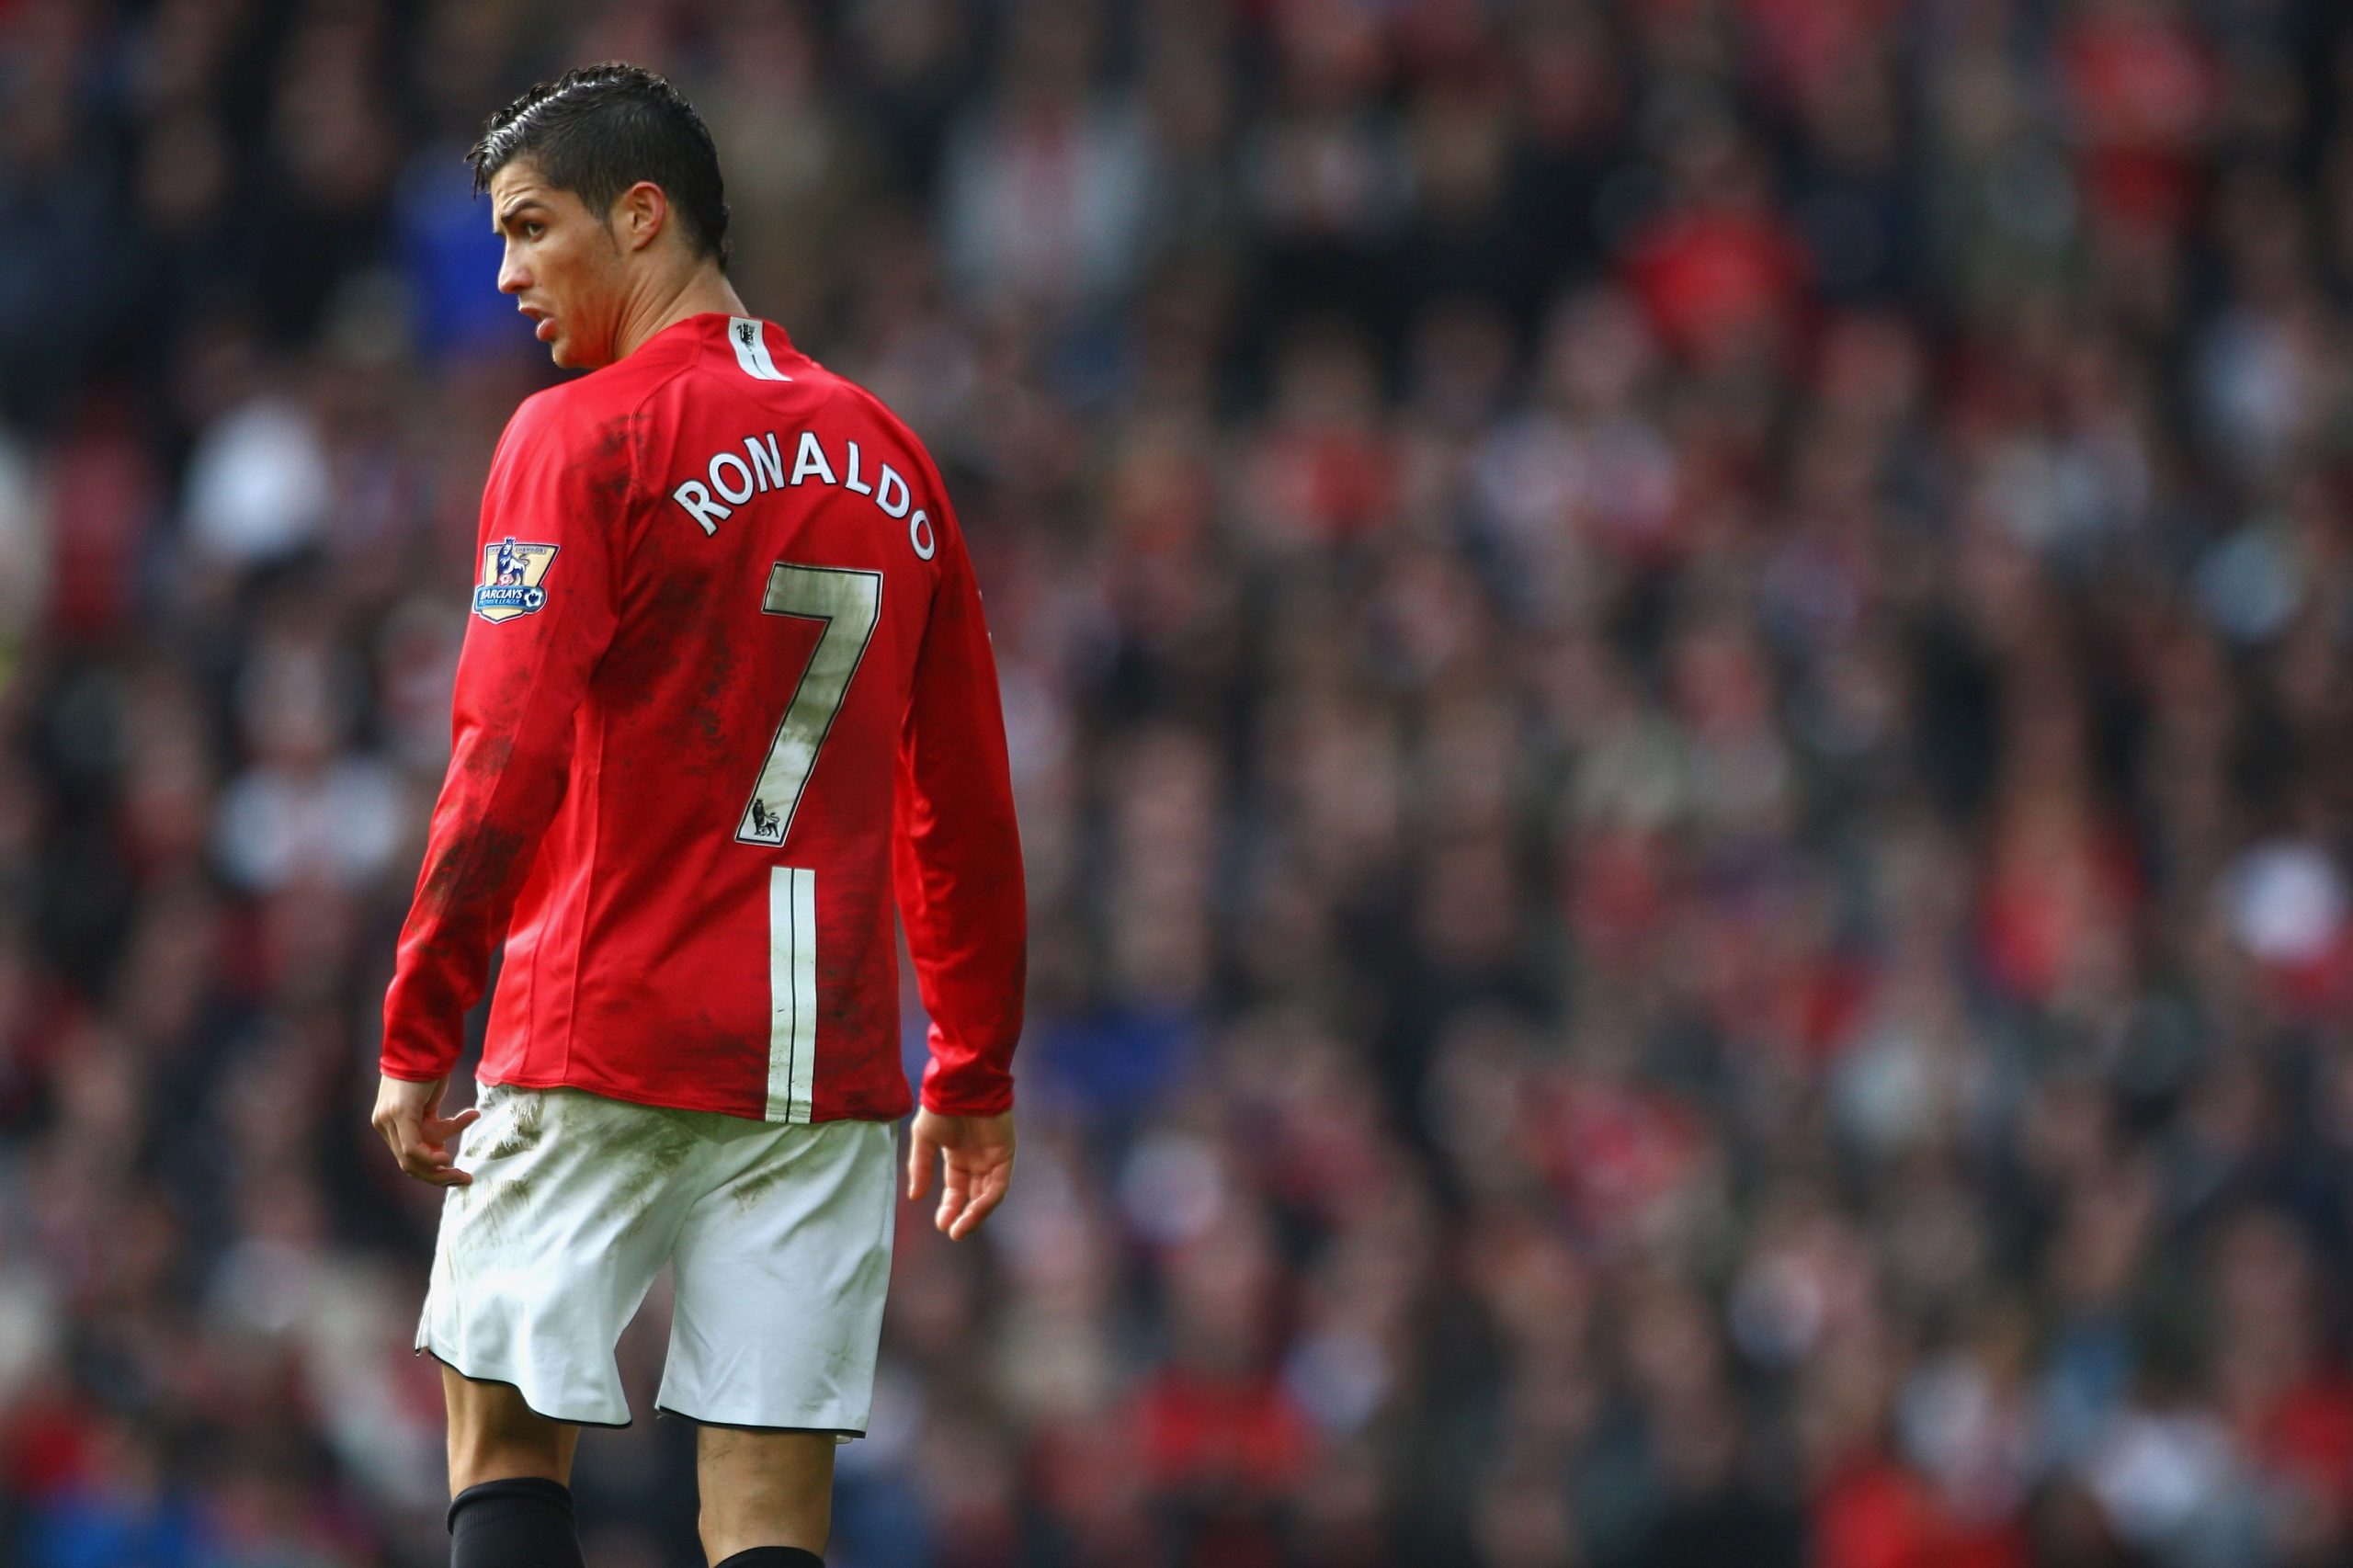 Laws deprive Ronaldo of his favourite Manchester United shirt